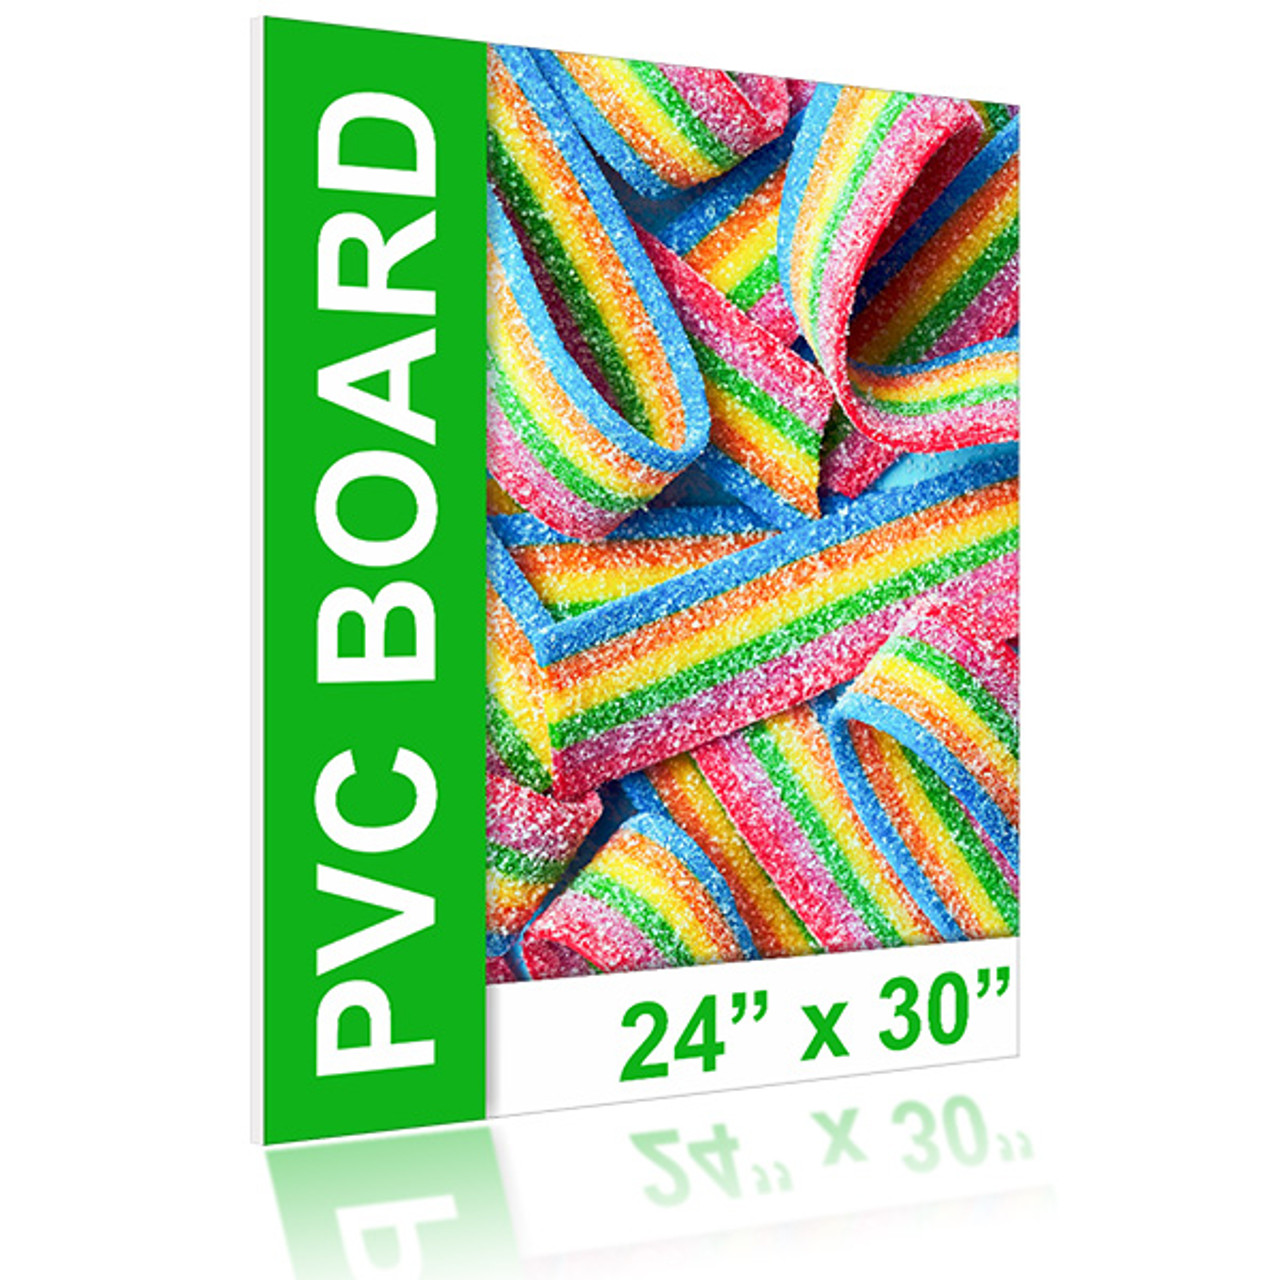 30 Pieces 30-Ct TrI-Fold Project Board, Assorted Colors - Poster & Foam  Boards - at 